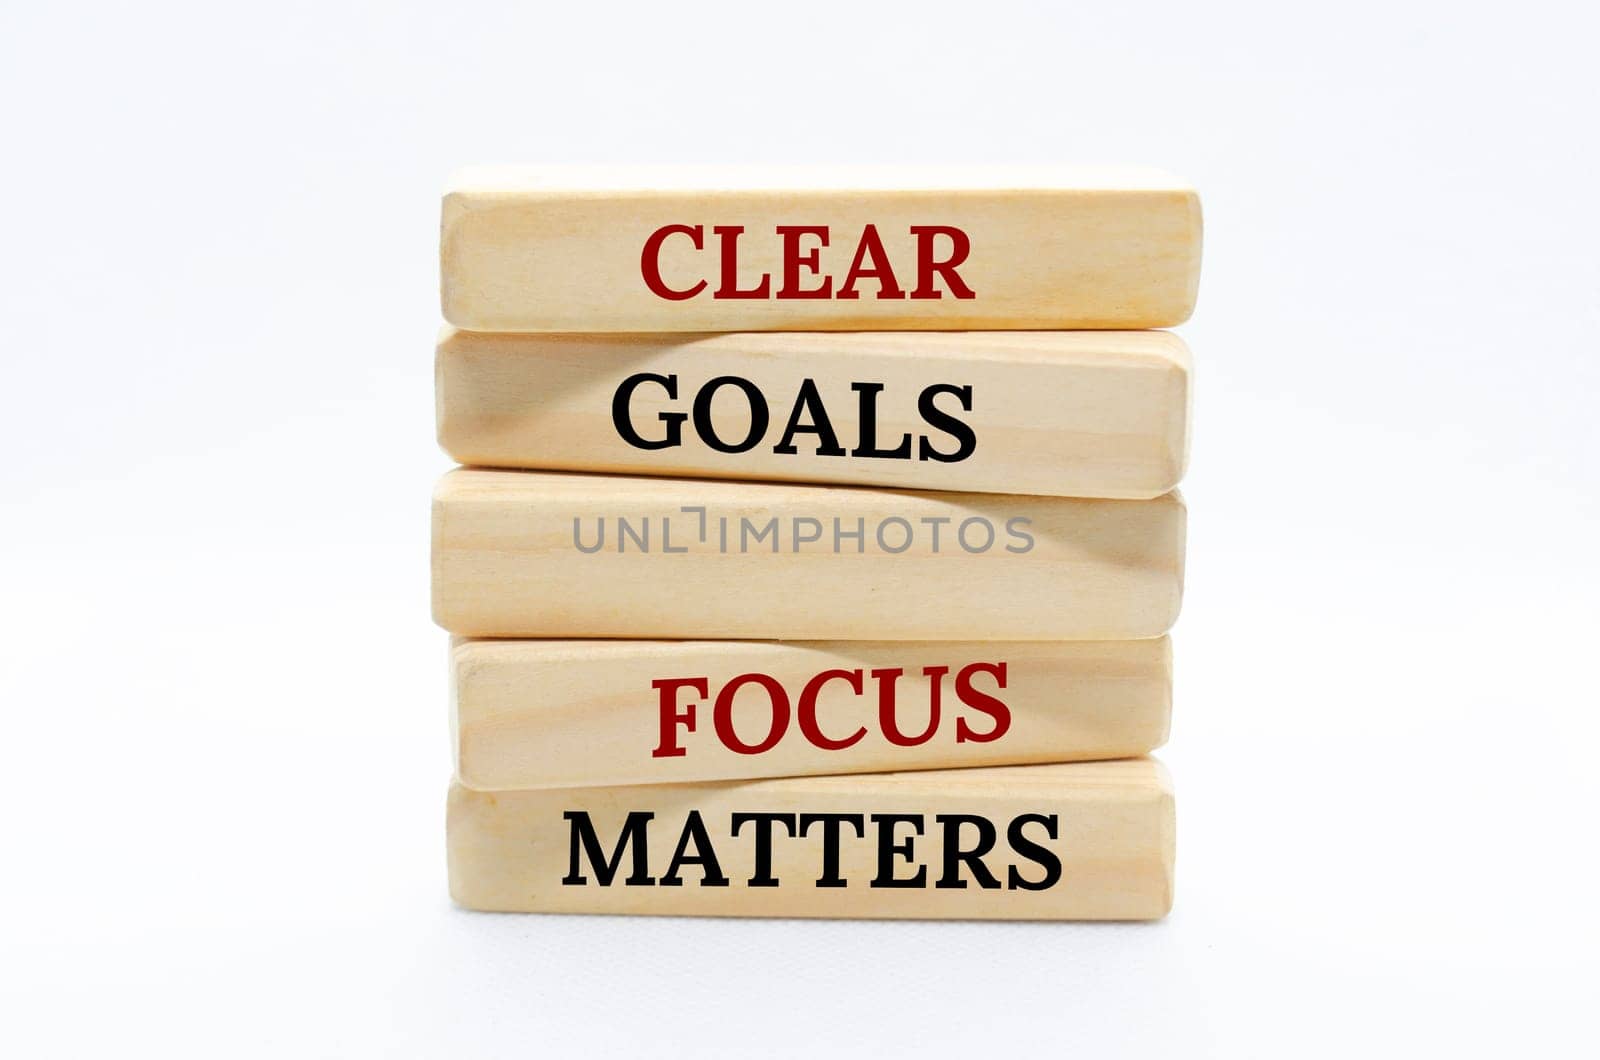 Clear goals and focus matters text on wooden blocks with white cover background by yom98